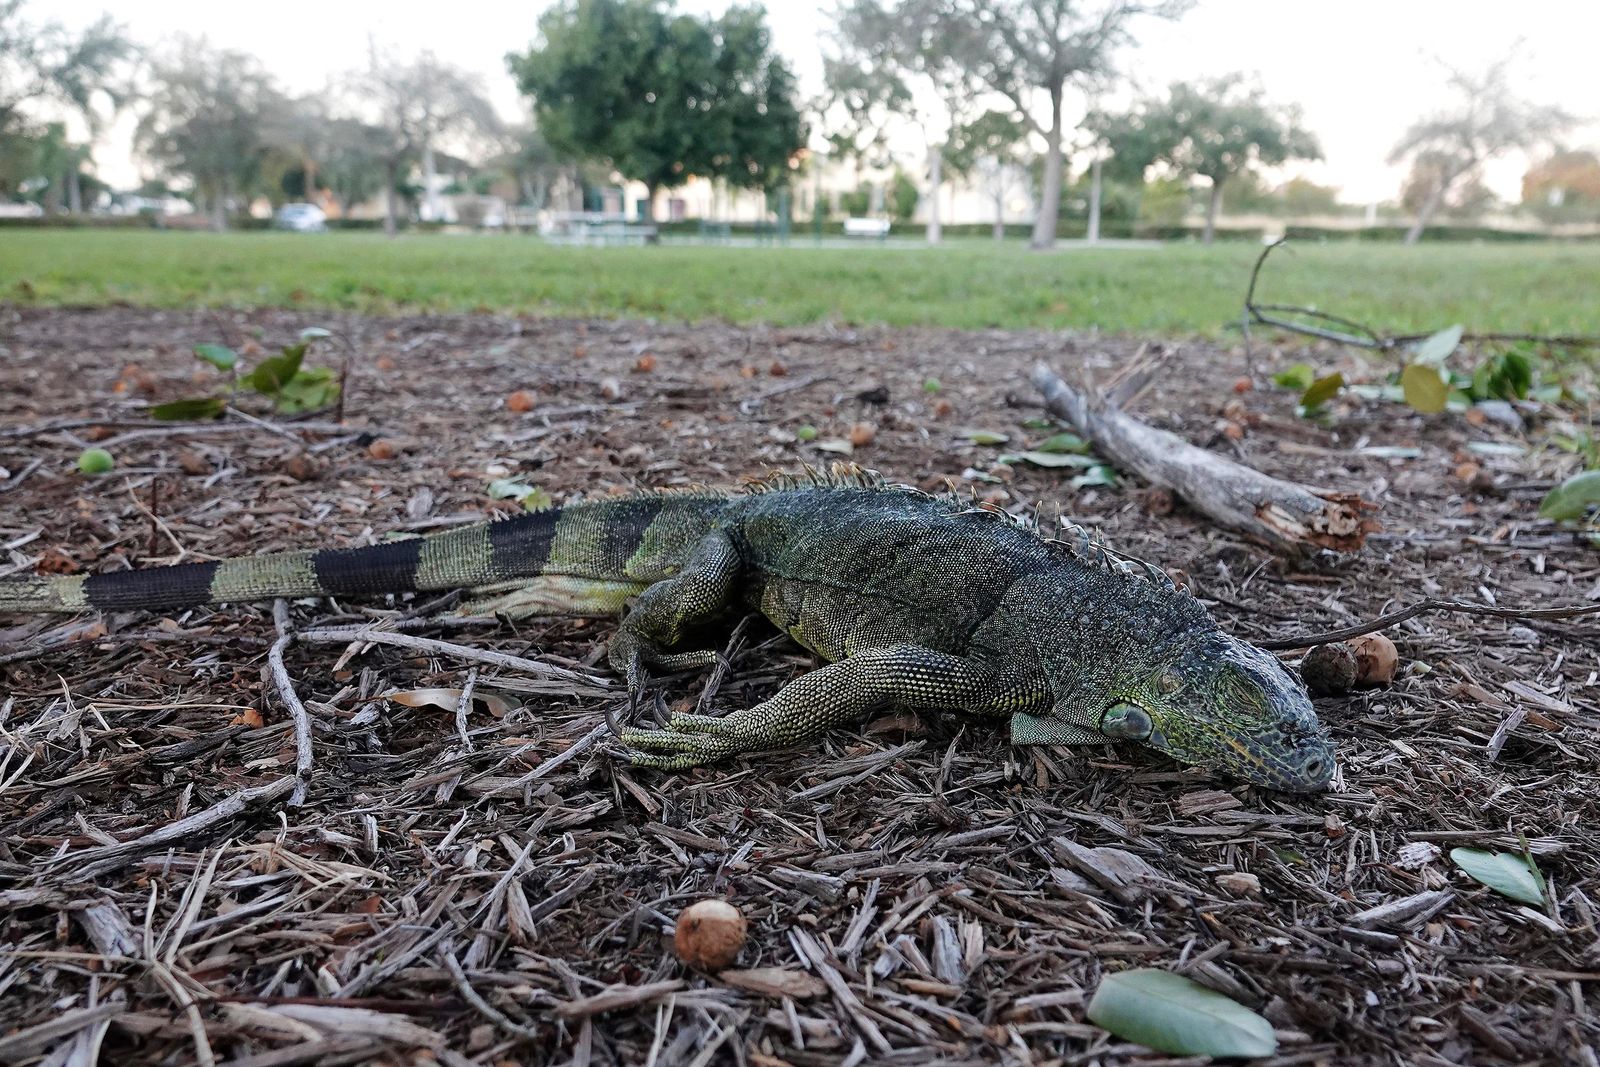 Lizards Fell From Palm Trees During a Florida Cold Snap, but Now They've Toughened Up